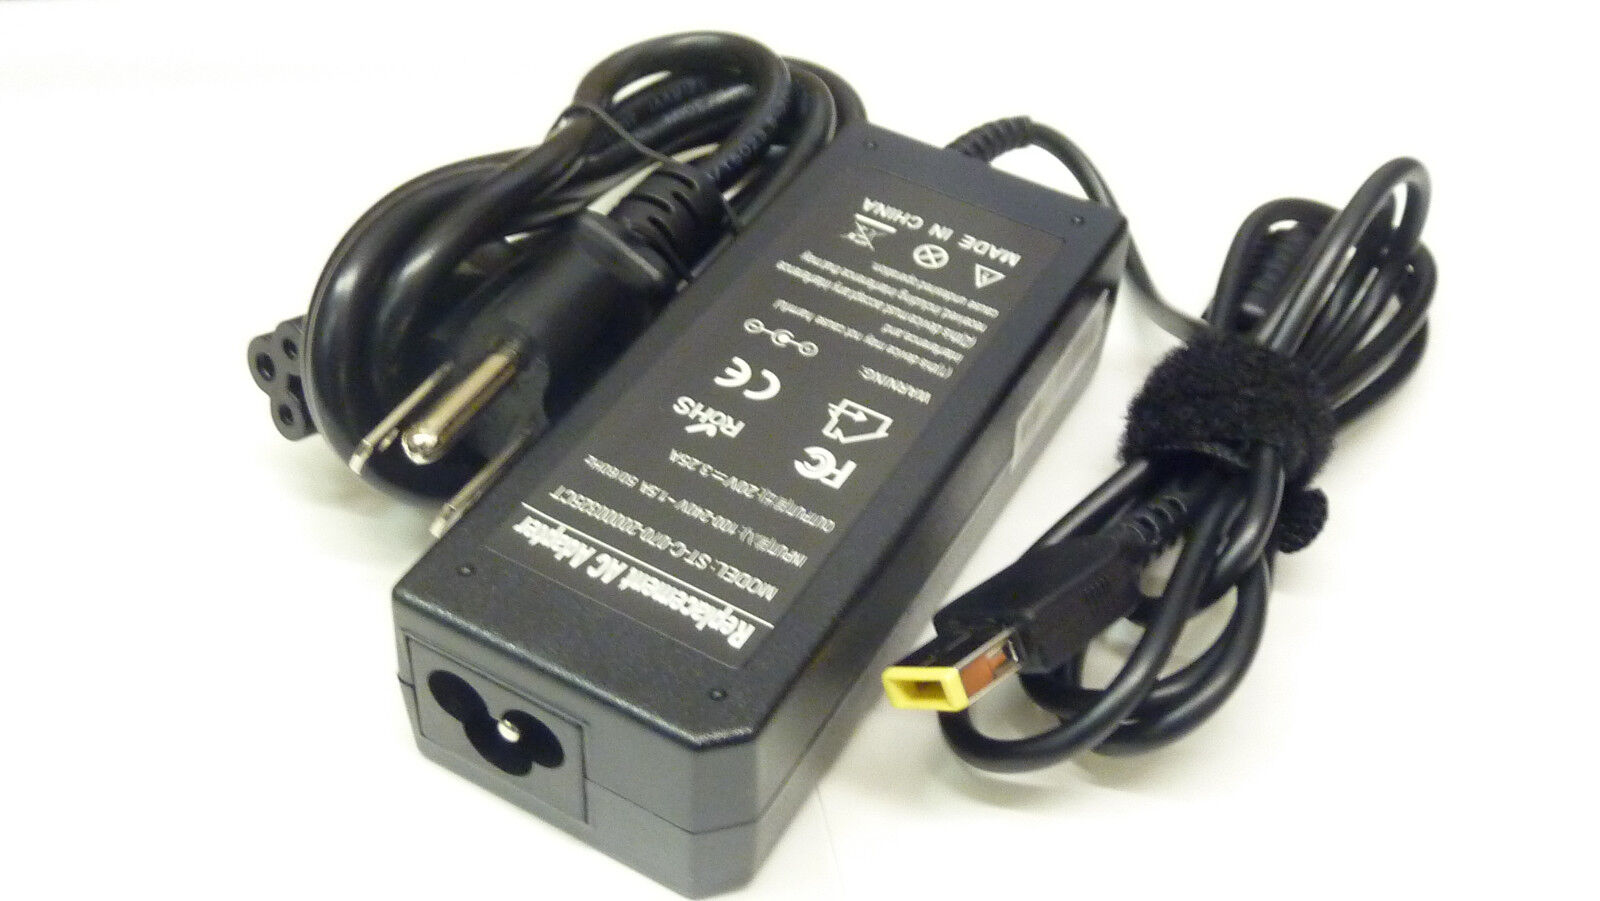 For Lenovo Ideapad S410p S500 S510p Laptop Battery Charger AC Adapter Power Cord